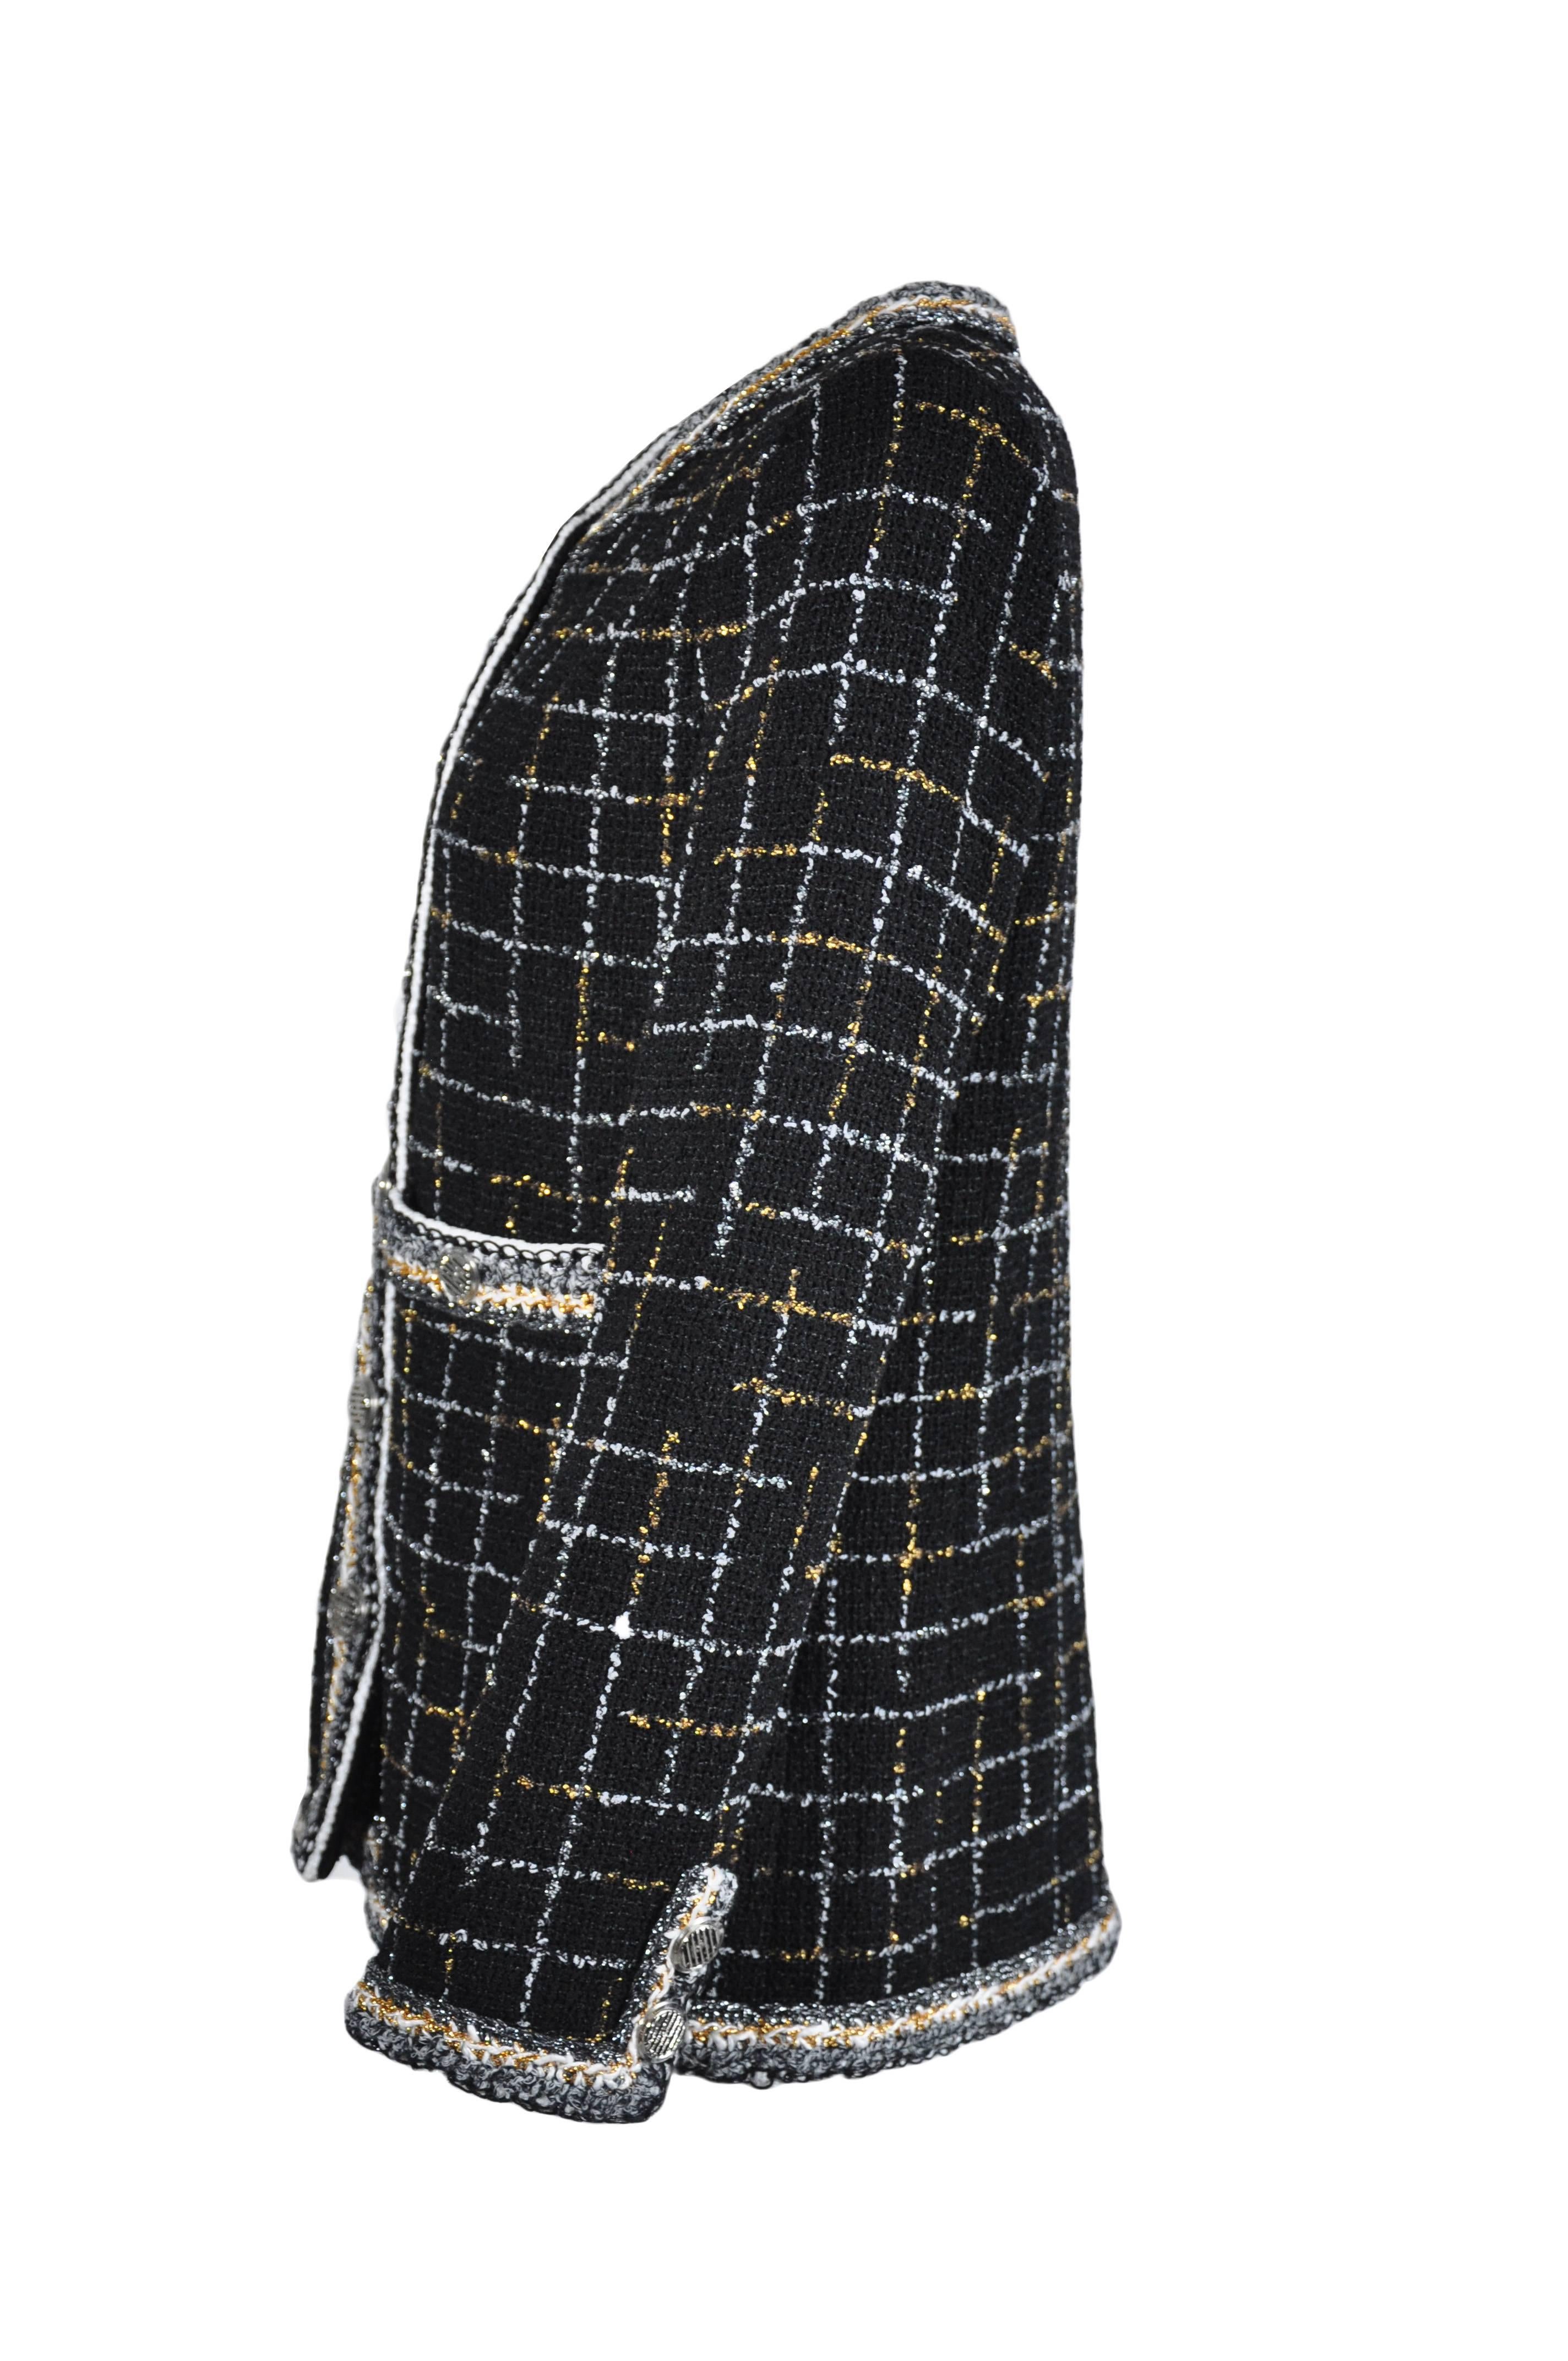 A sold out iconic tweed jacket from Chanel 2017 Spring/Summer runway collection.  Classic black tweed jacket decorates with gold/silver tone grids and trimmings. Button fastenings through front with two pockets. Fully lined in silk.